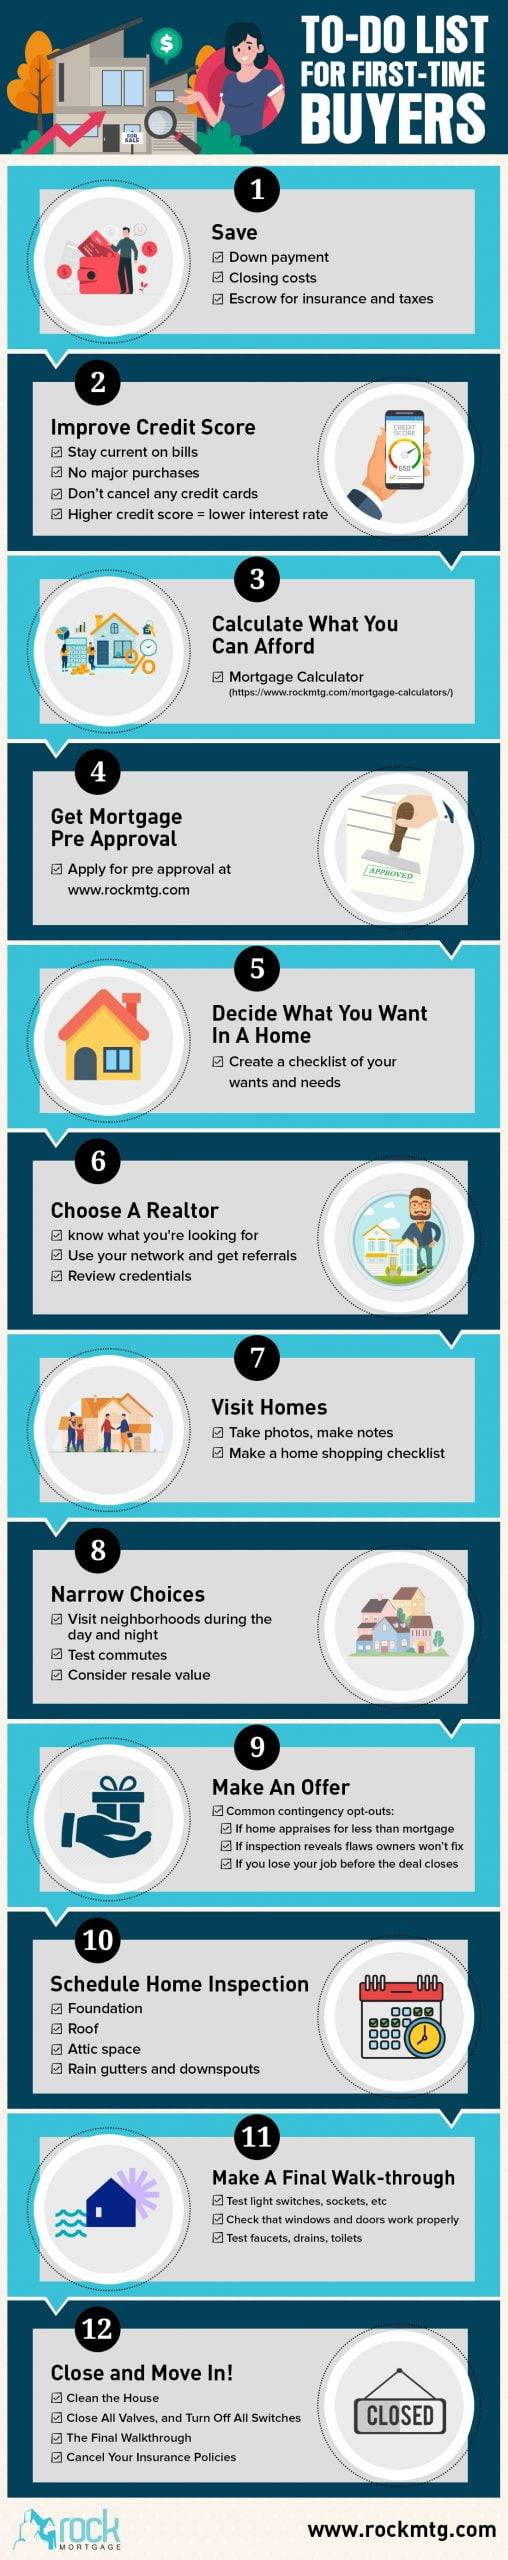 To do list of First Time Buyers